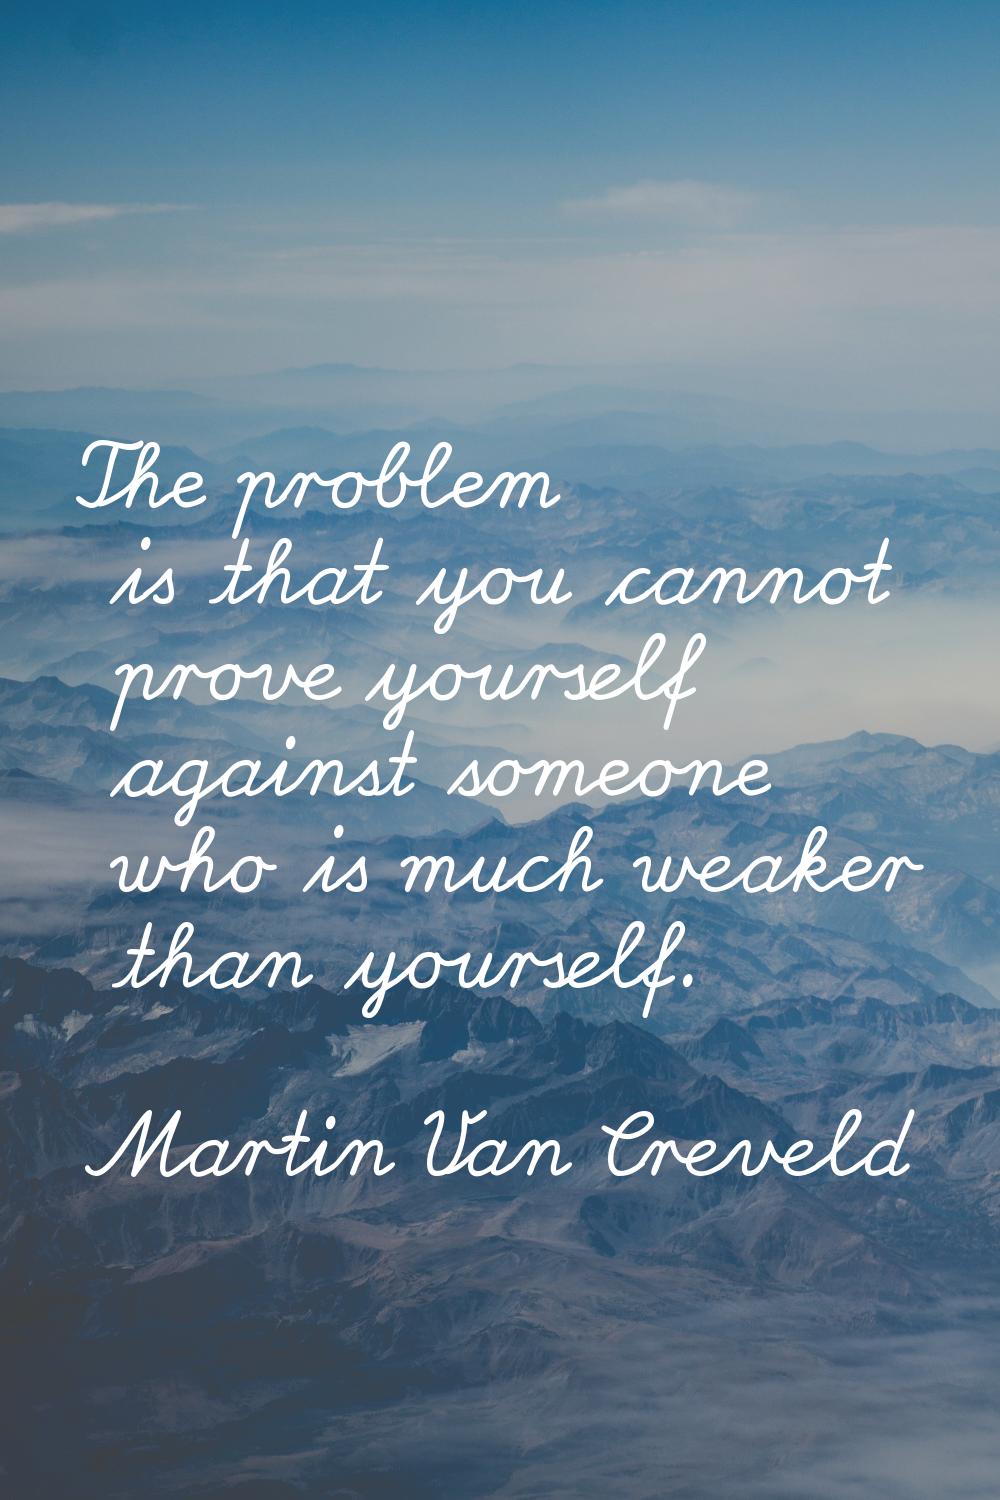 The problem is that you cannot prove yourself against someone who is much weaker than yourself.